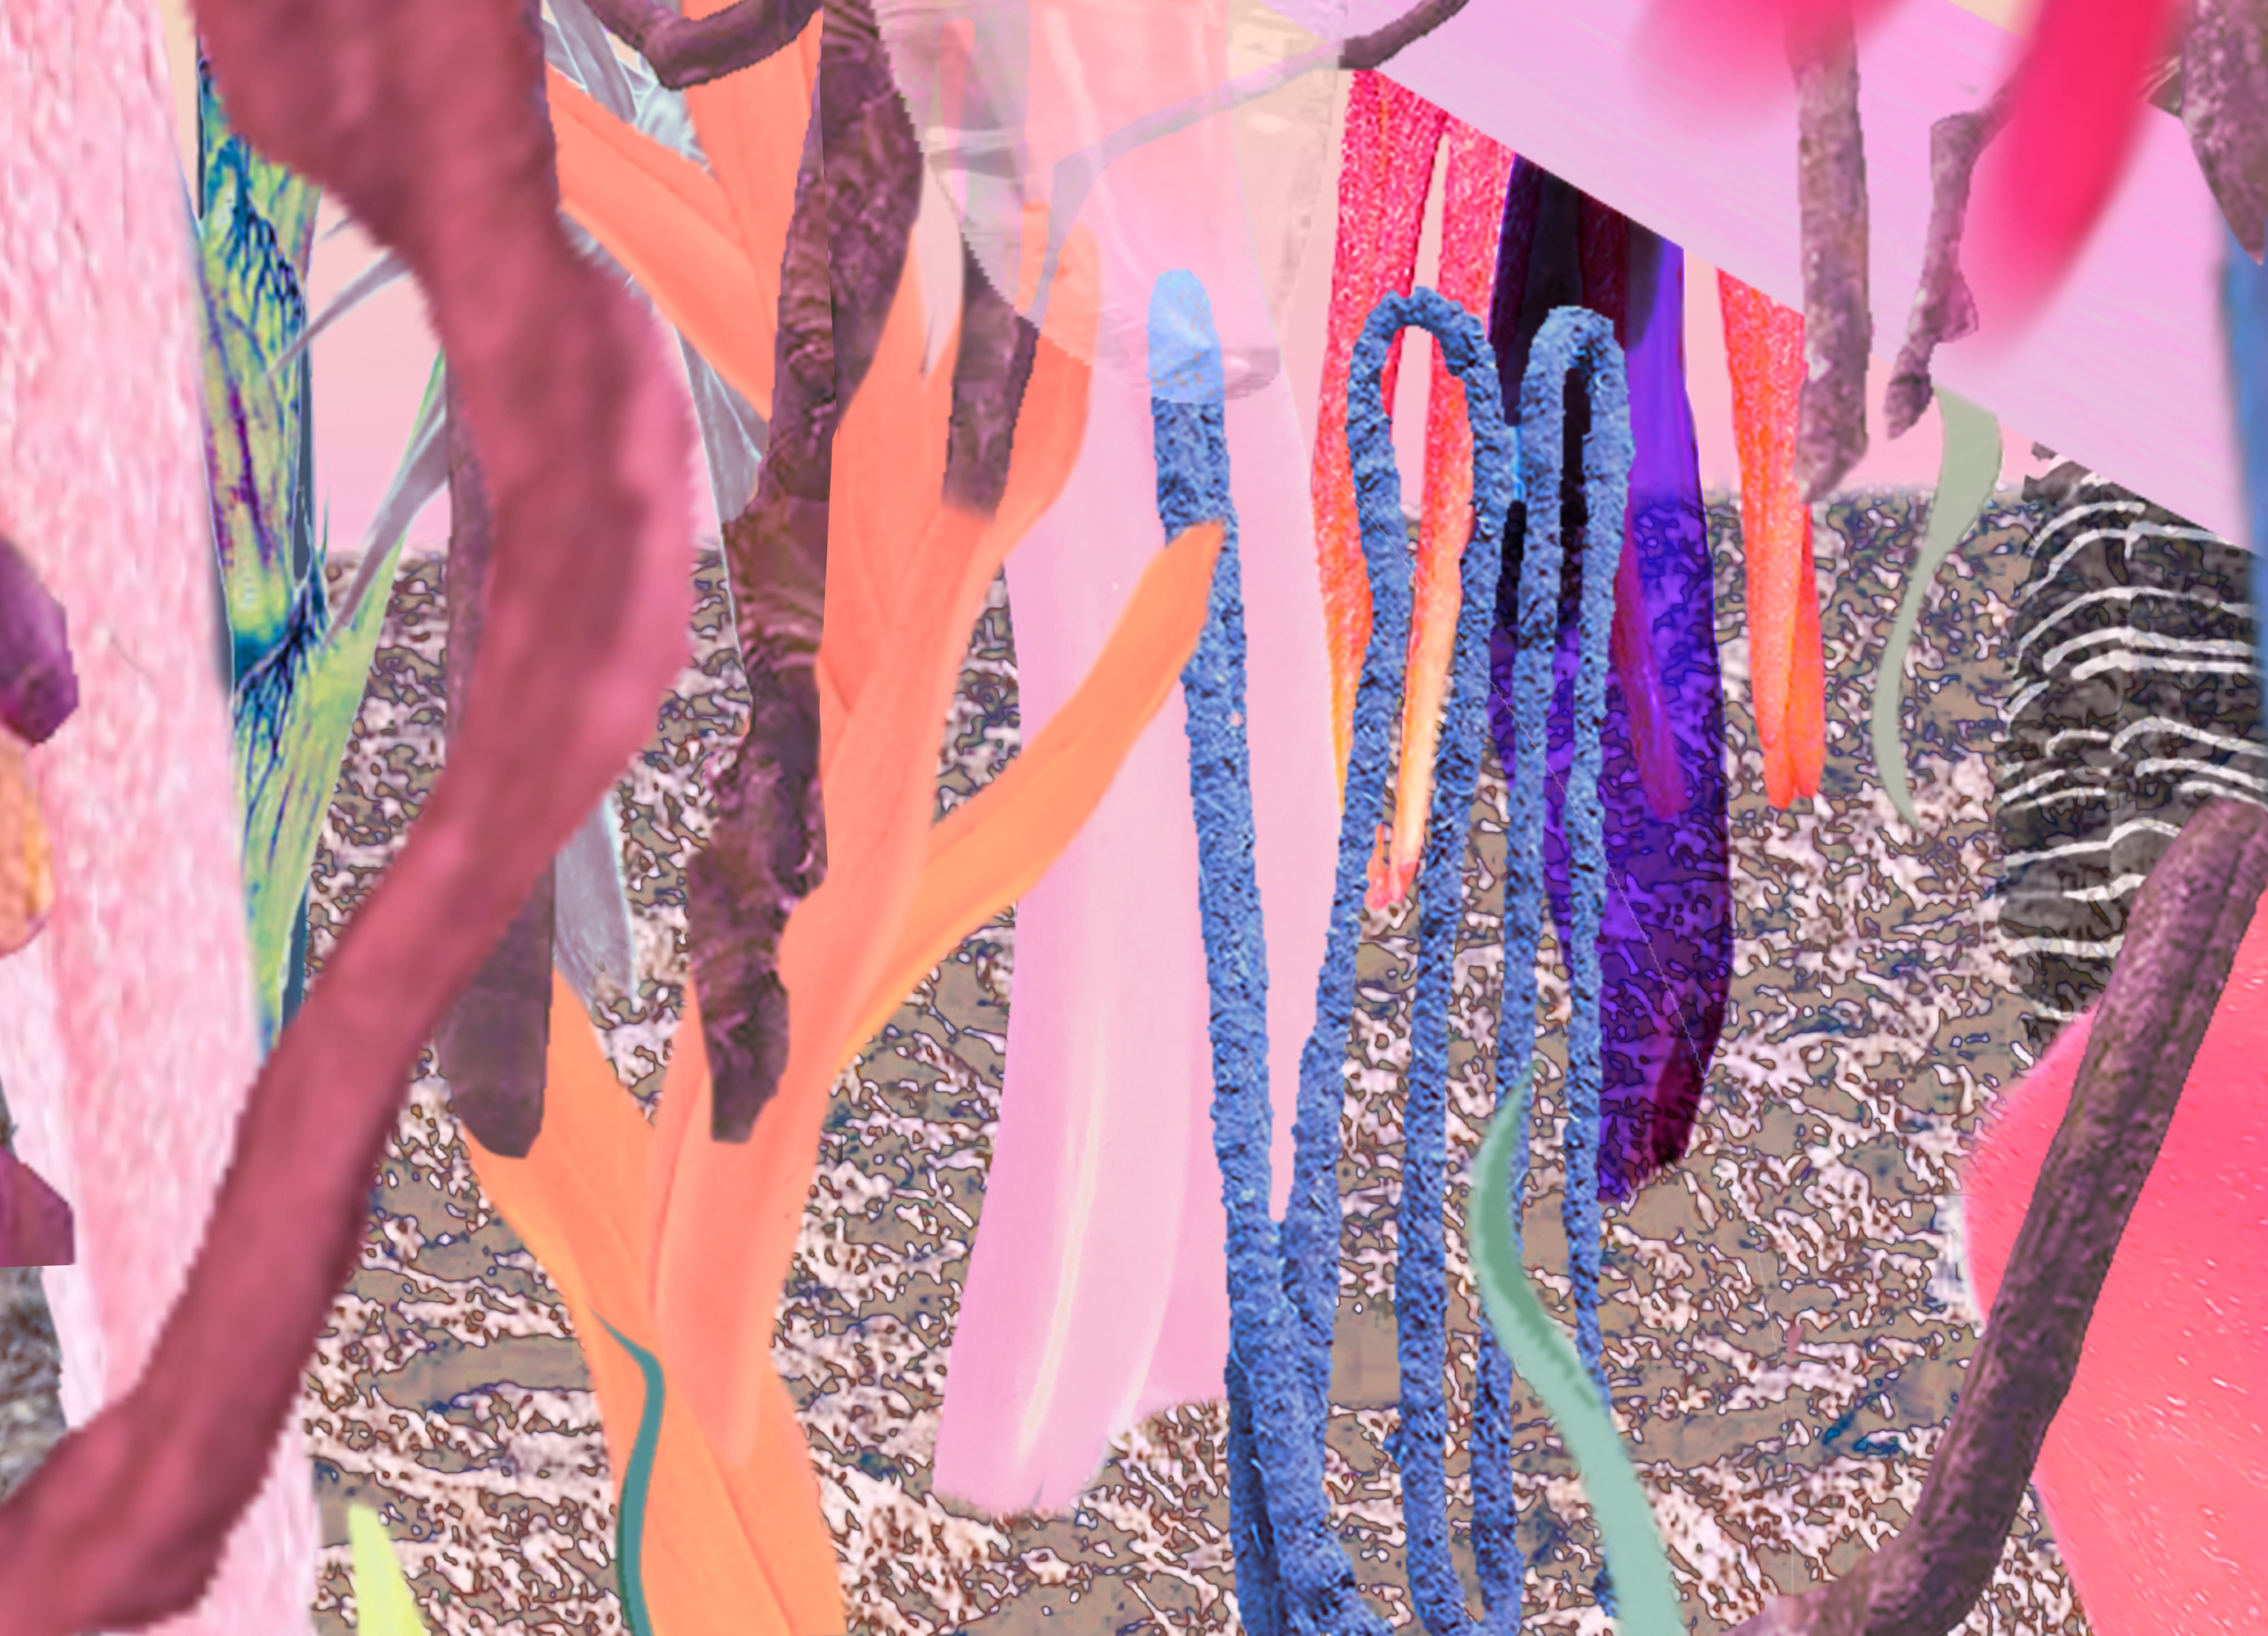 The picture FOREST OF TONGUES (Etana and Naomi, 2021) is a digital collage of found footage. You can see tongues in different colours, shapes and structures, which together form a forest of tongues.